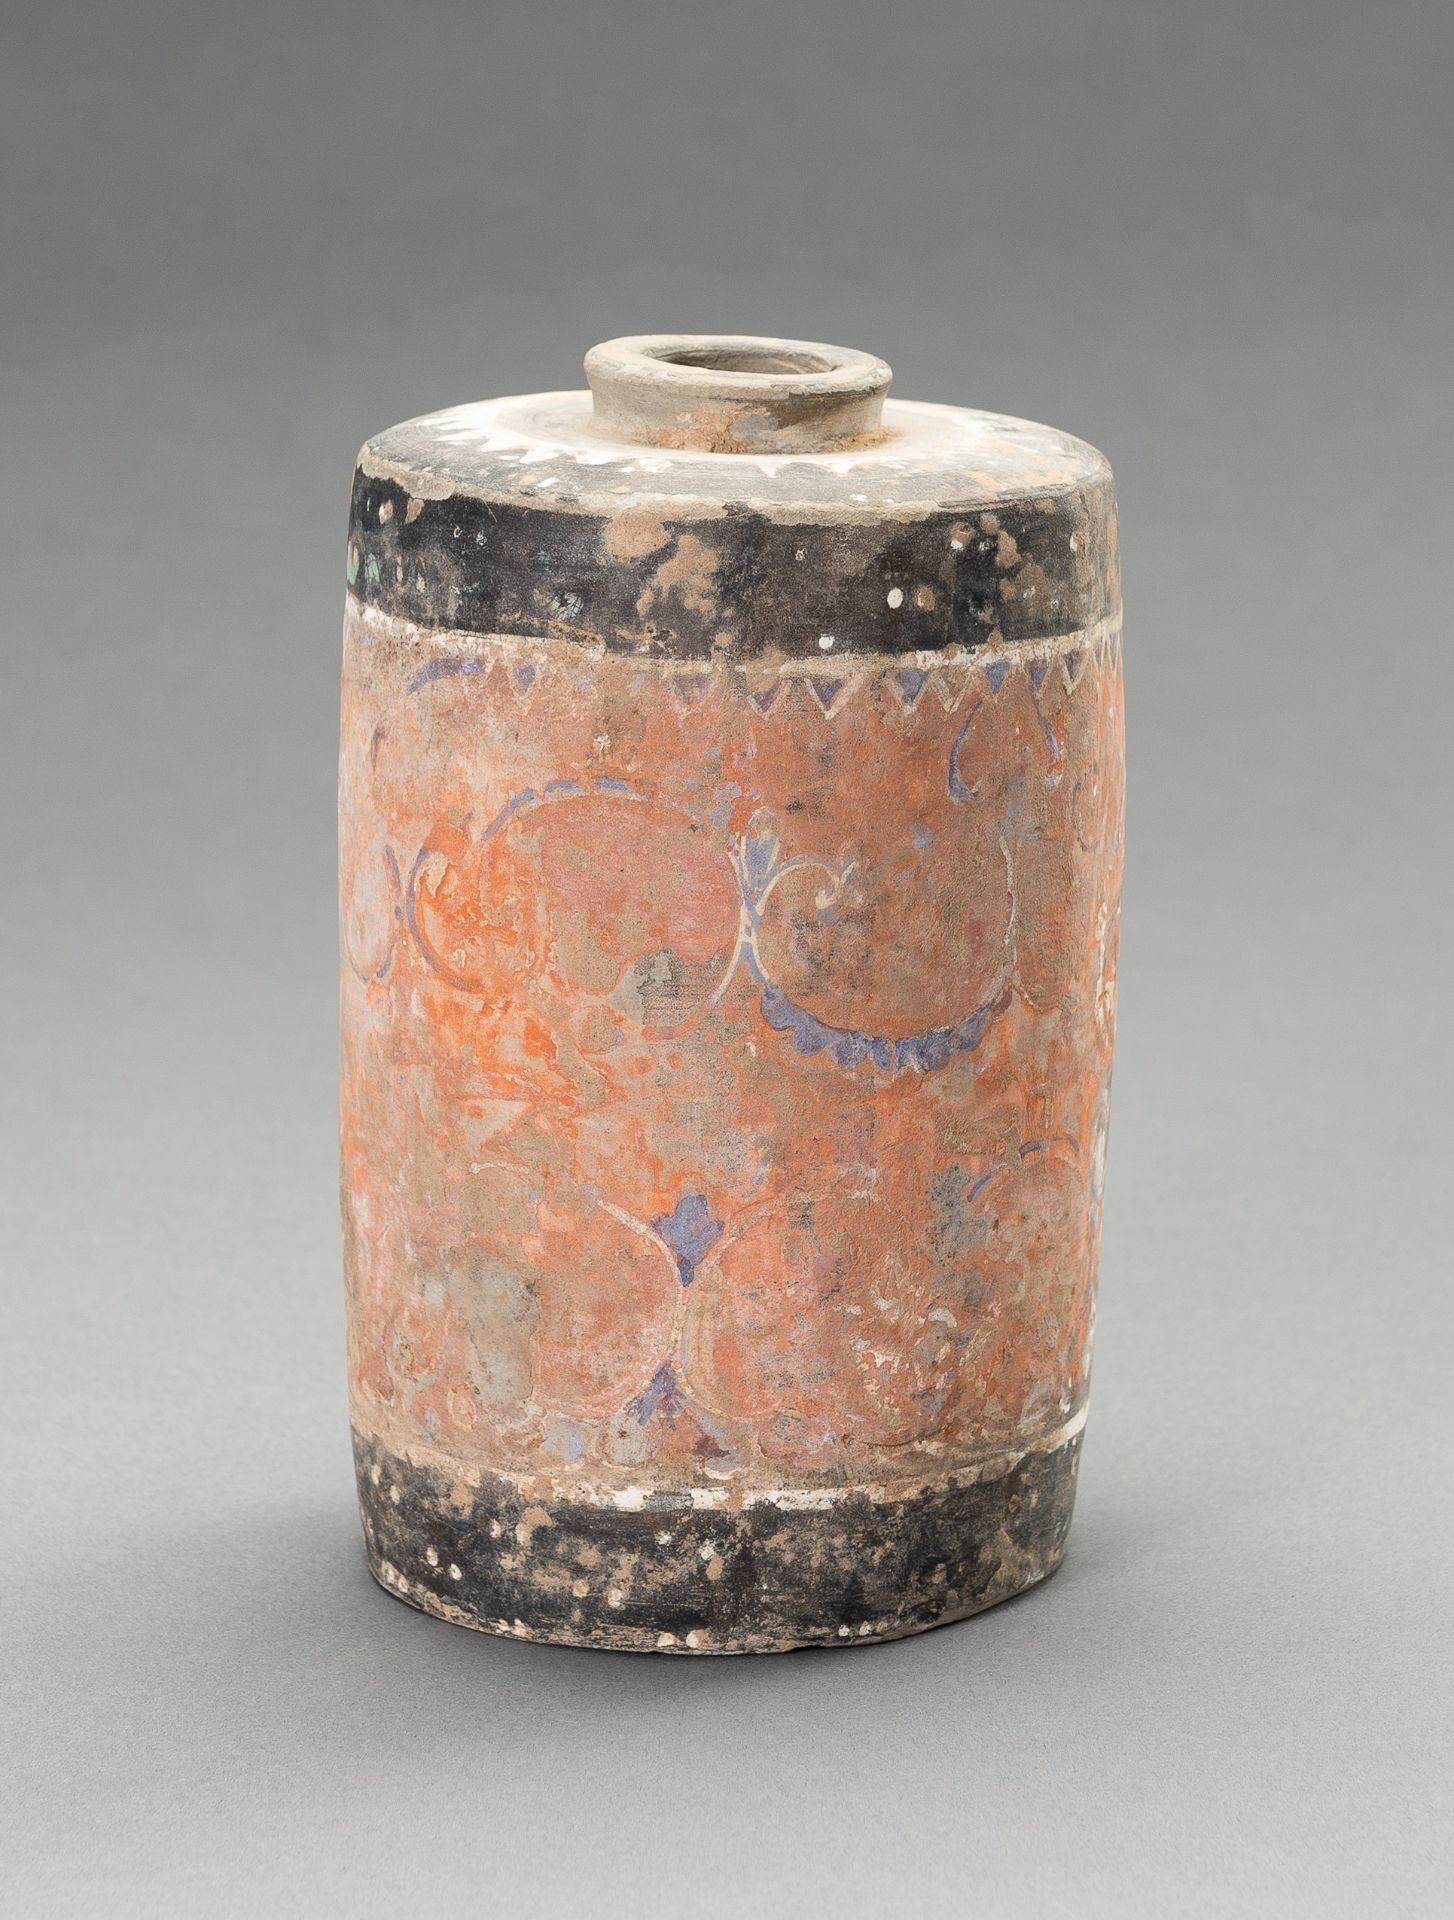 A PAINTED POTTERY ROULEAU VASE, HAN DYNASTY